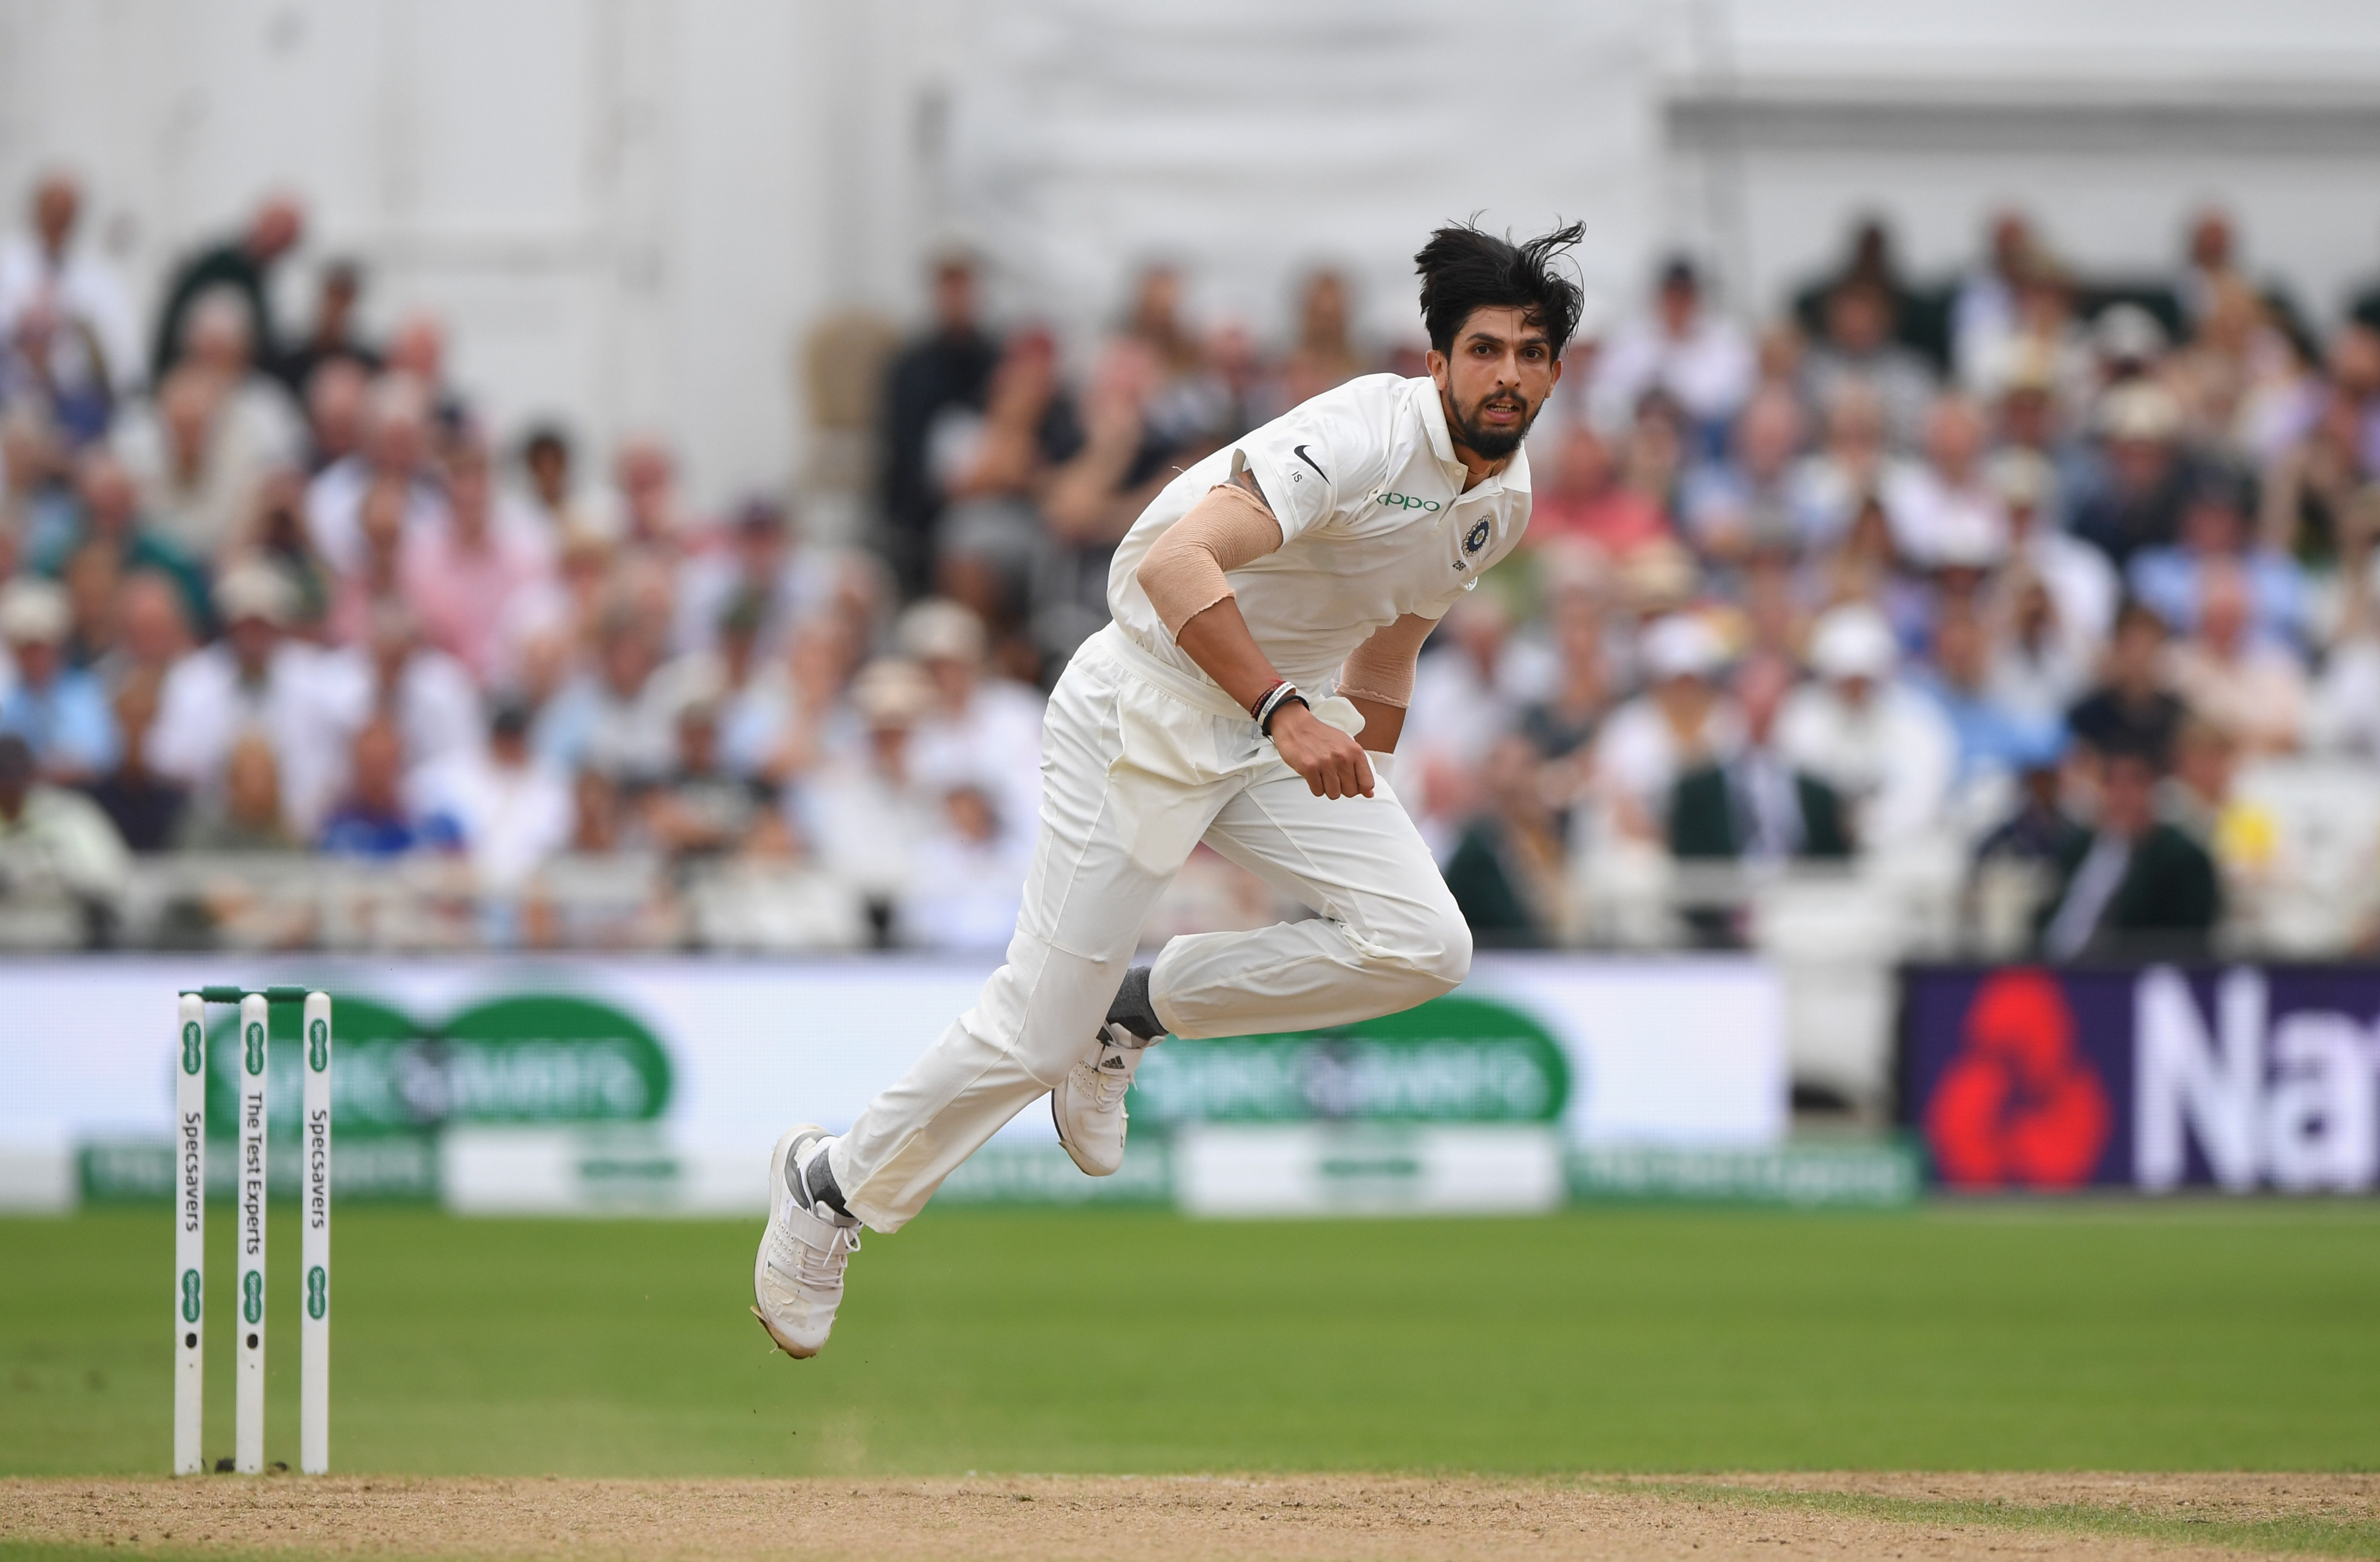 2019 WC: Why India should pick Ishant Sharma as their fourth main pacer? 22